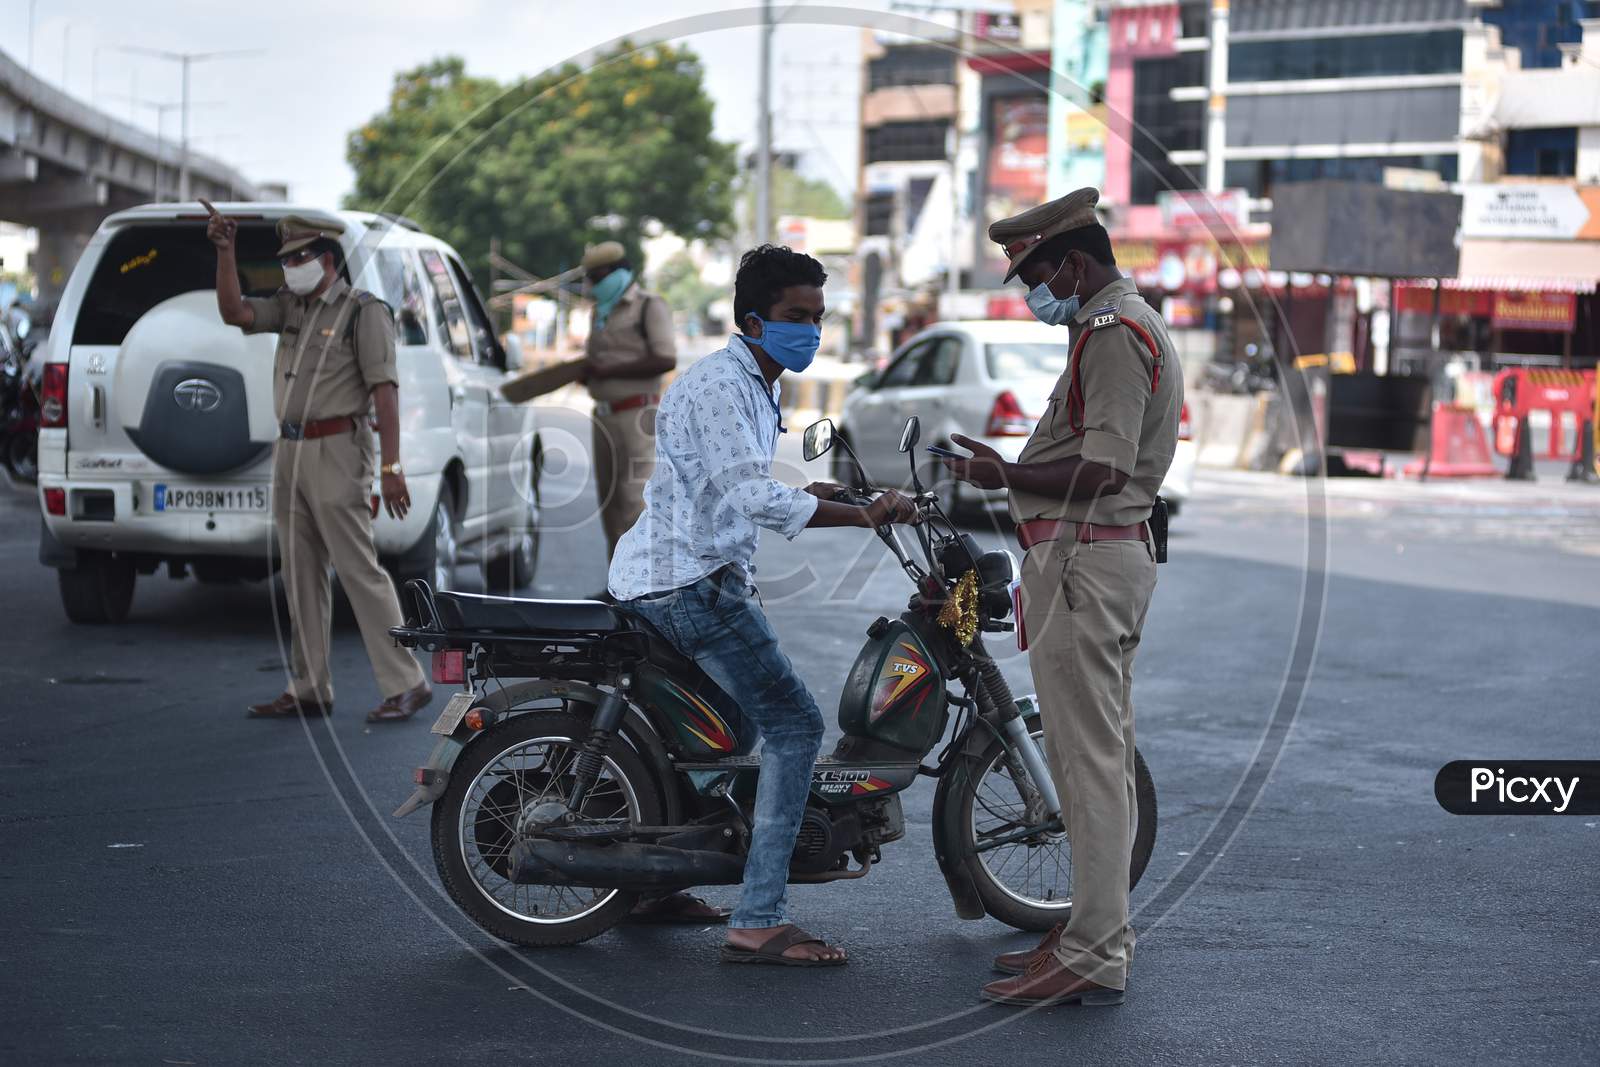 Police Personnel Stops The Commuters And Seeks An Explanation For Violating The Lockdown Norms During The Nationwide Lockdown Amid Coronavirus Pandemic In Vijayawada.